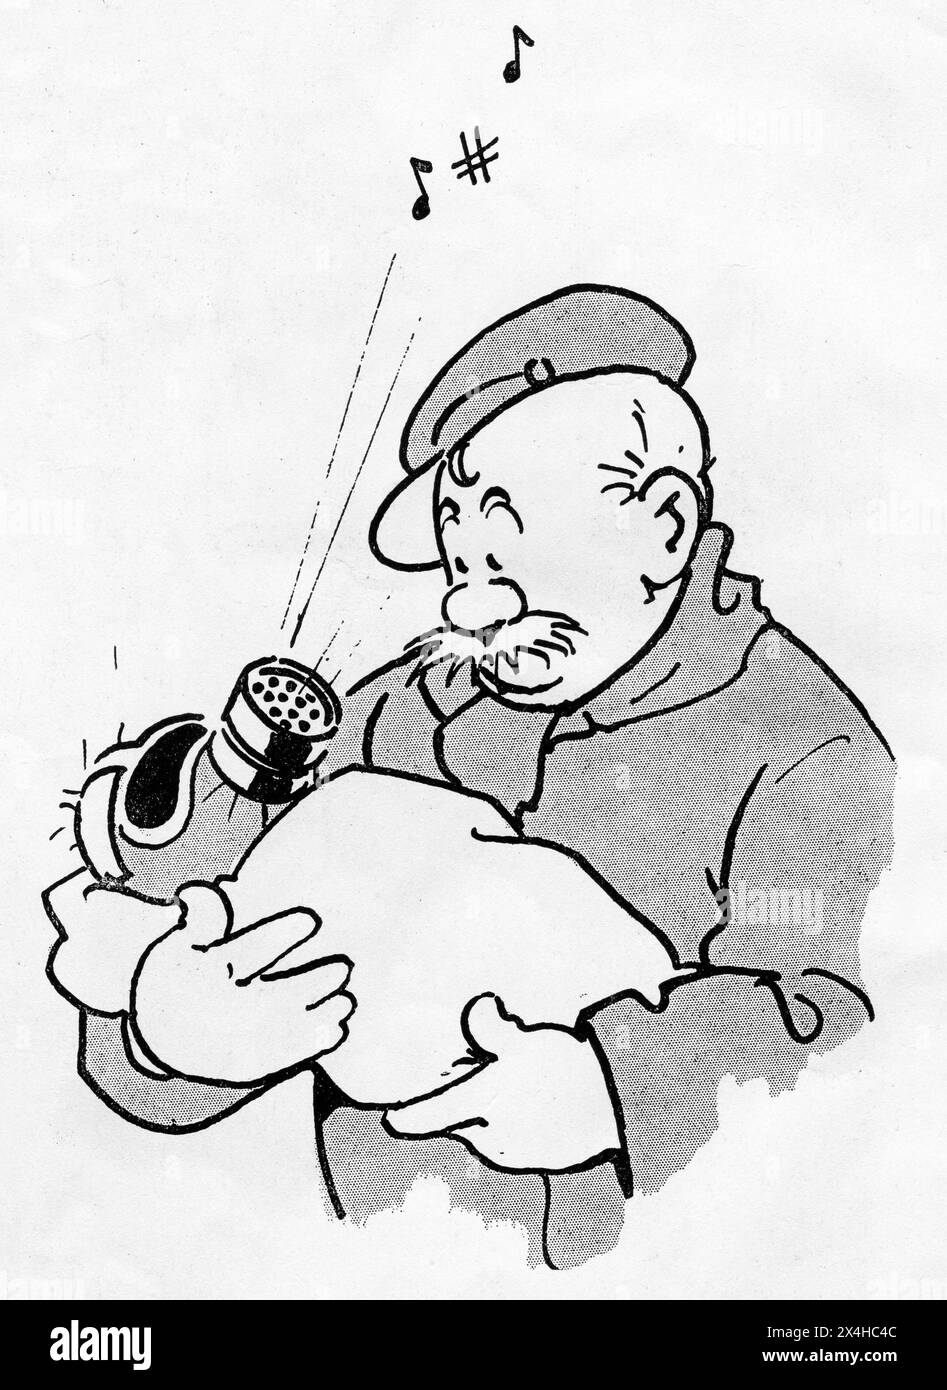 1940s - An amusing Second World War period cartoon depicting the popular fictional British soldier character, Old Bill, created by the cartoonist Bruce Bairnsfather. This cartoon shows Old Bill holding a baby, who is wearing a gas mask. Stock Photo